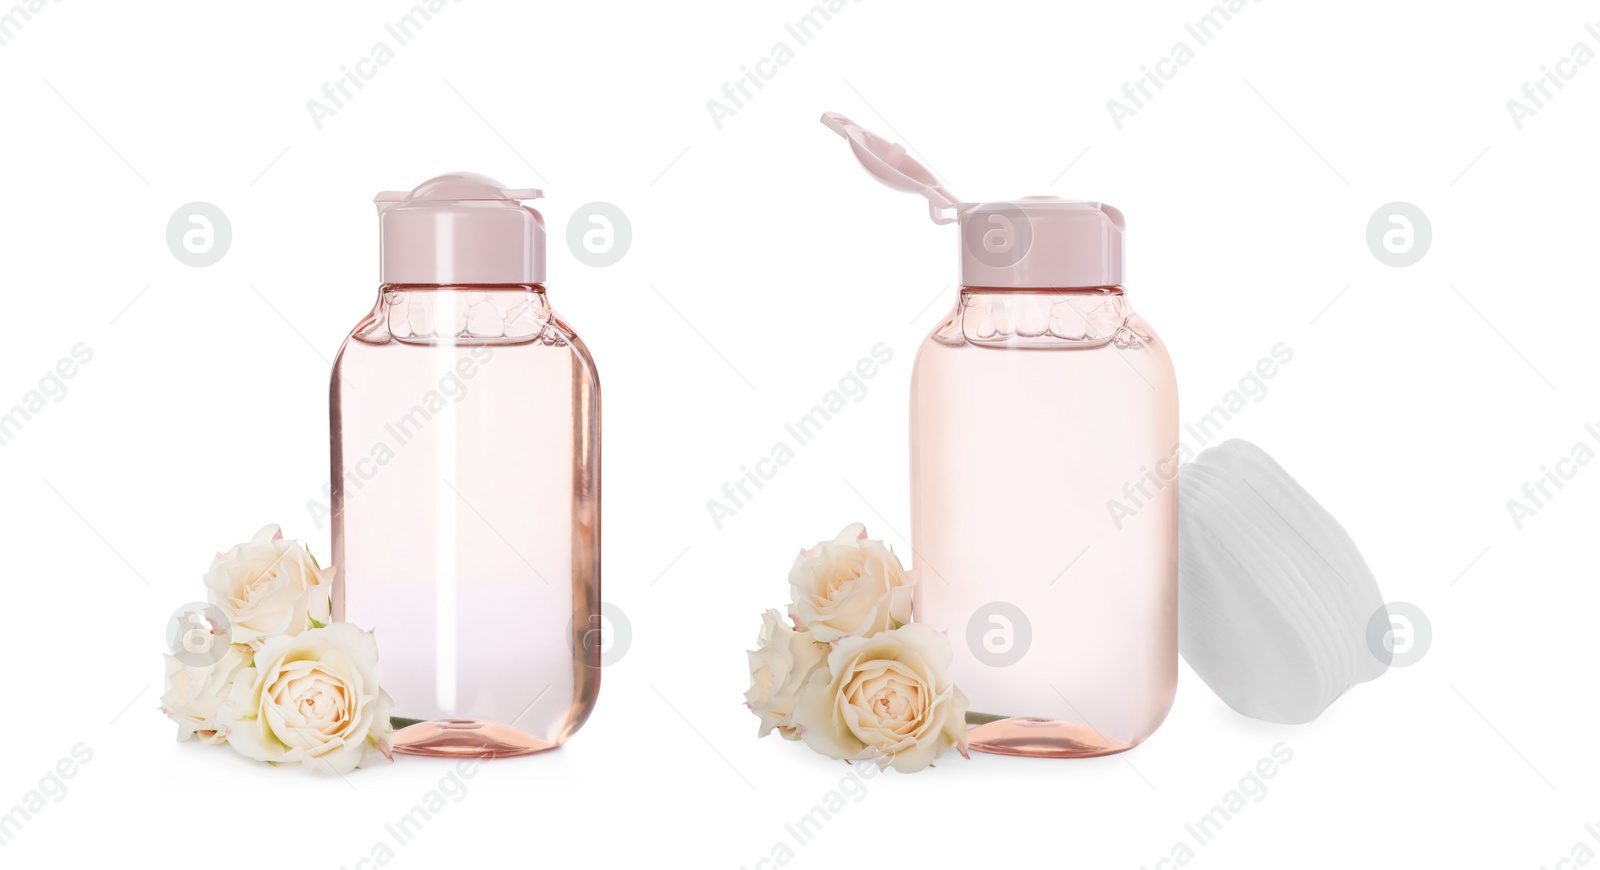 Image of Collage with bottle of micellar cleansing water on white background